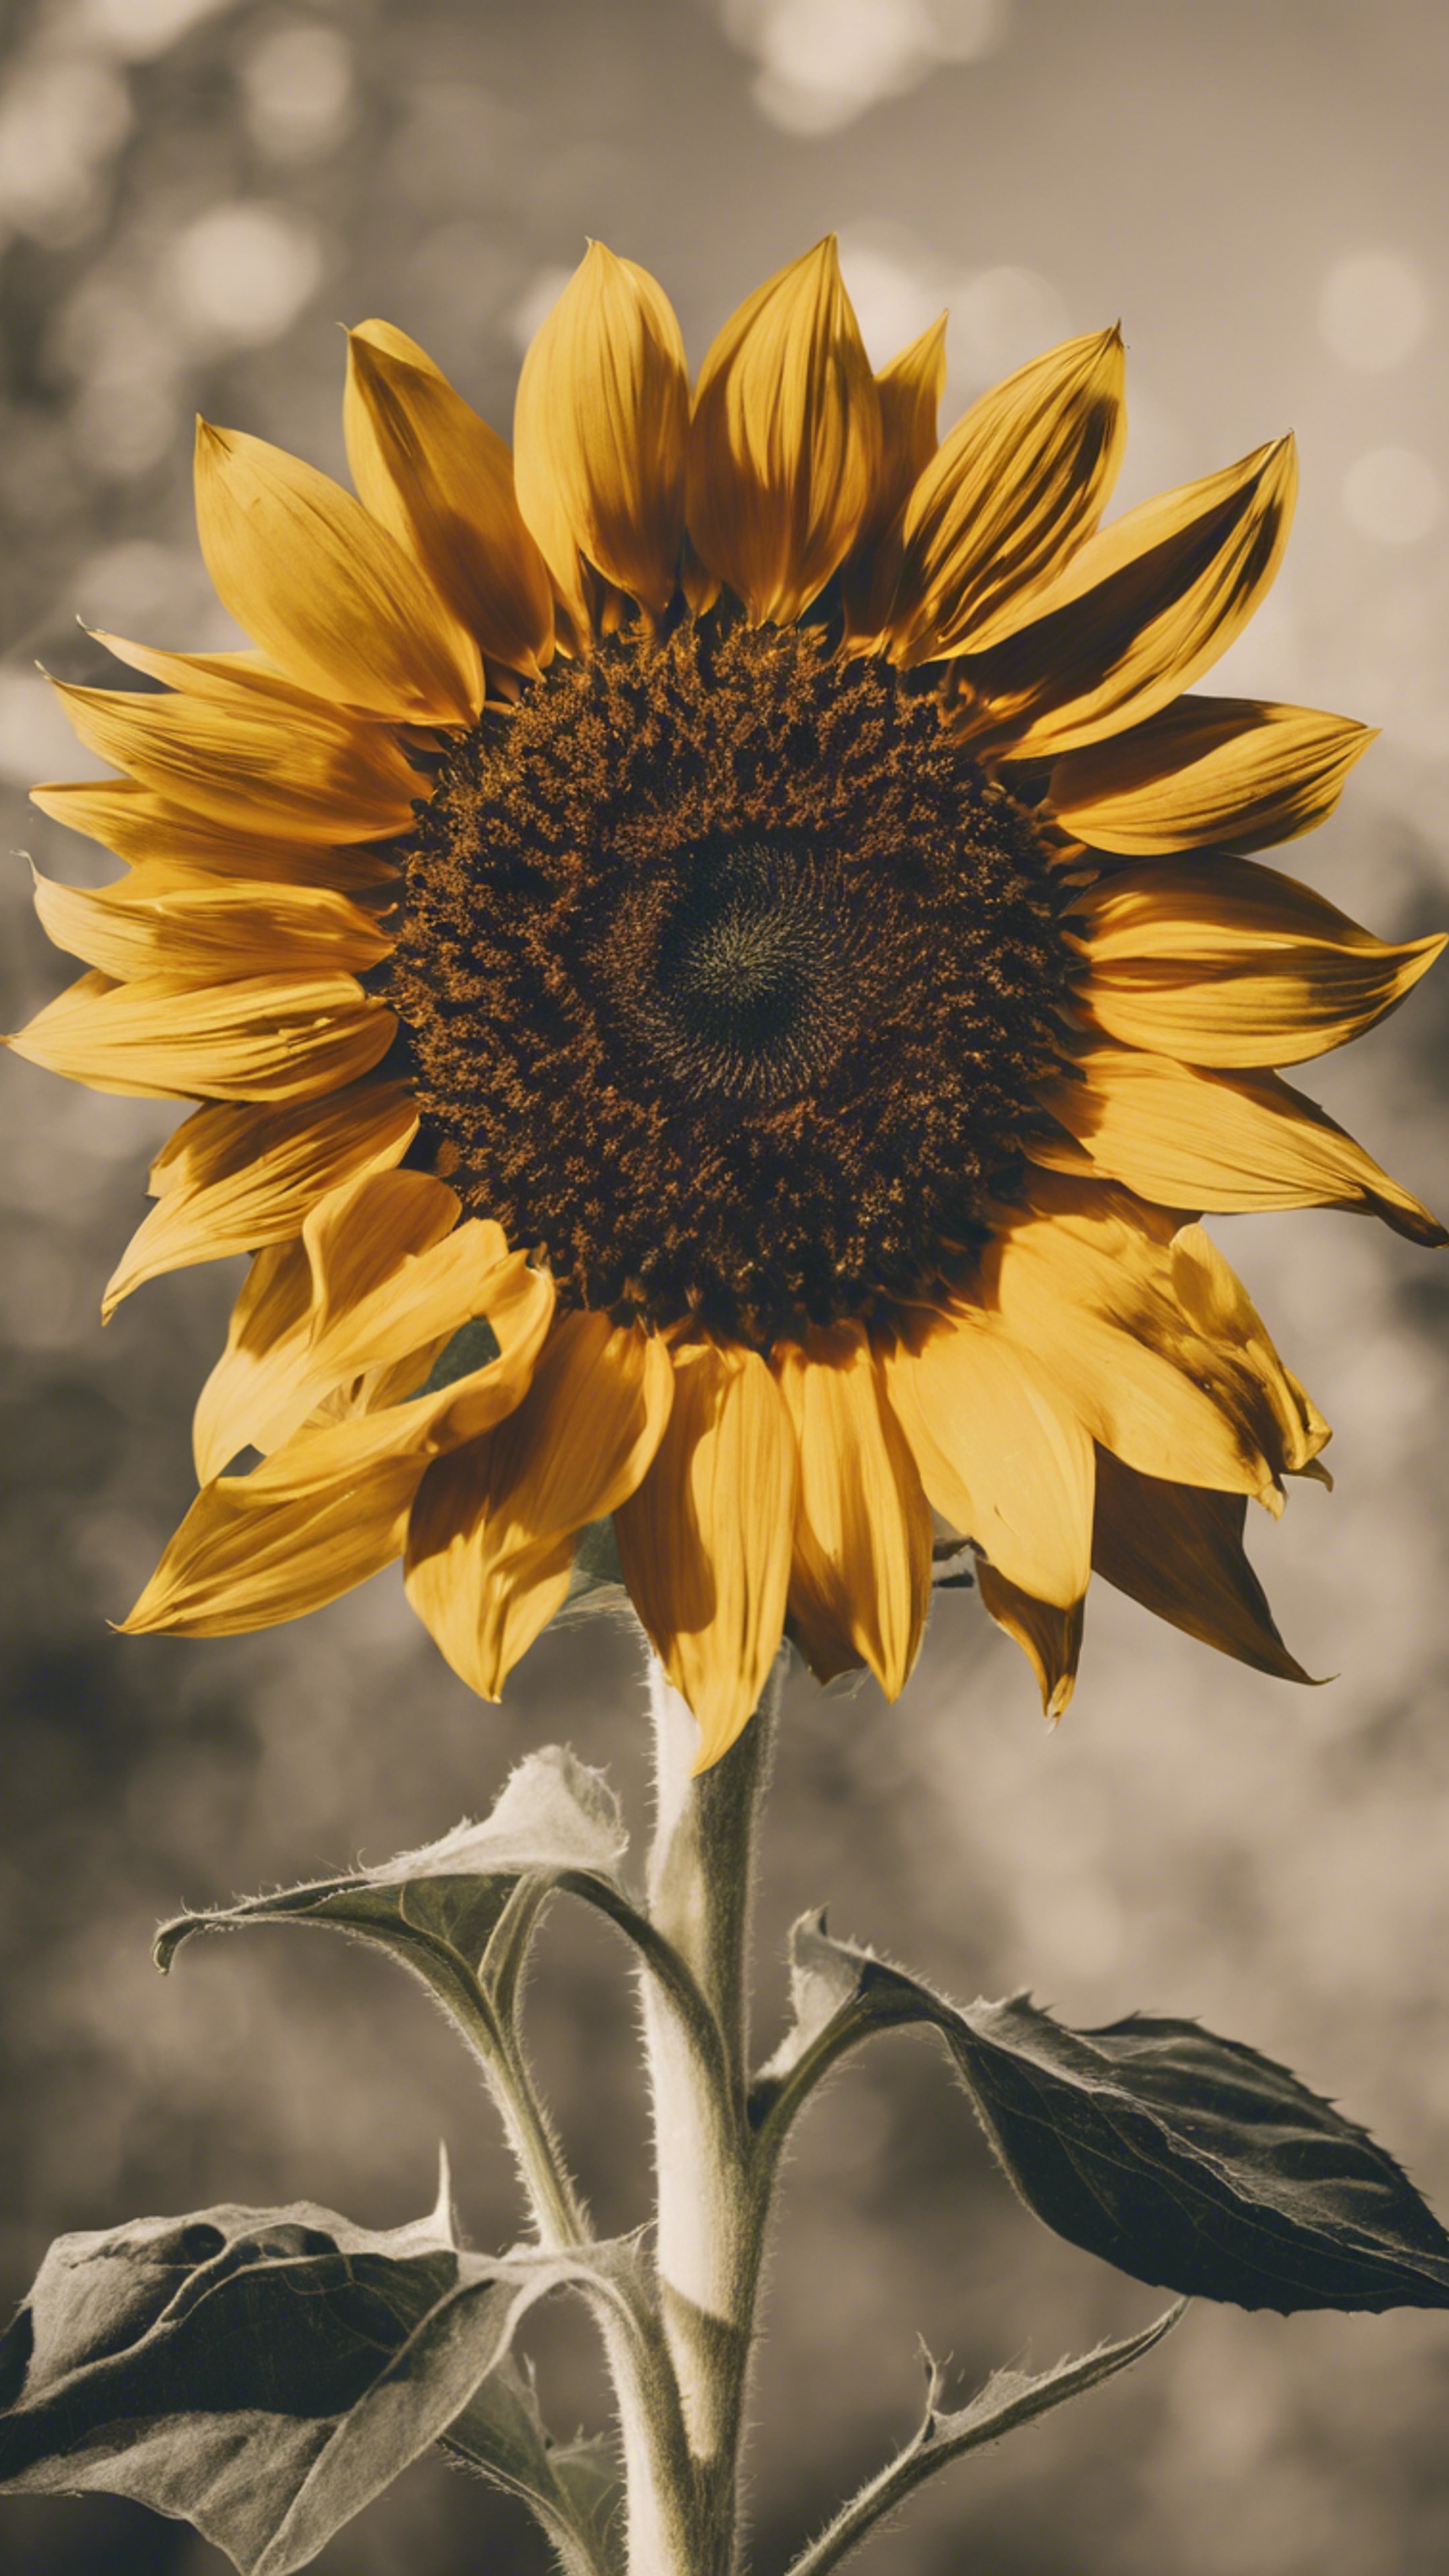 A stylized retro sunflower with bold yellow petals and a dark brown center. Tapet[13785a0774844f708a81]